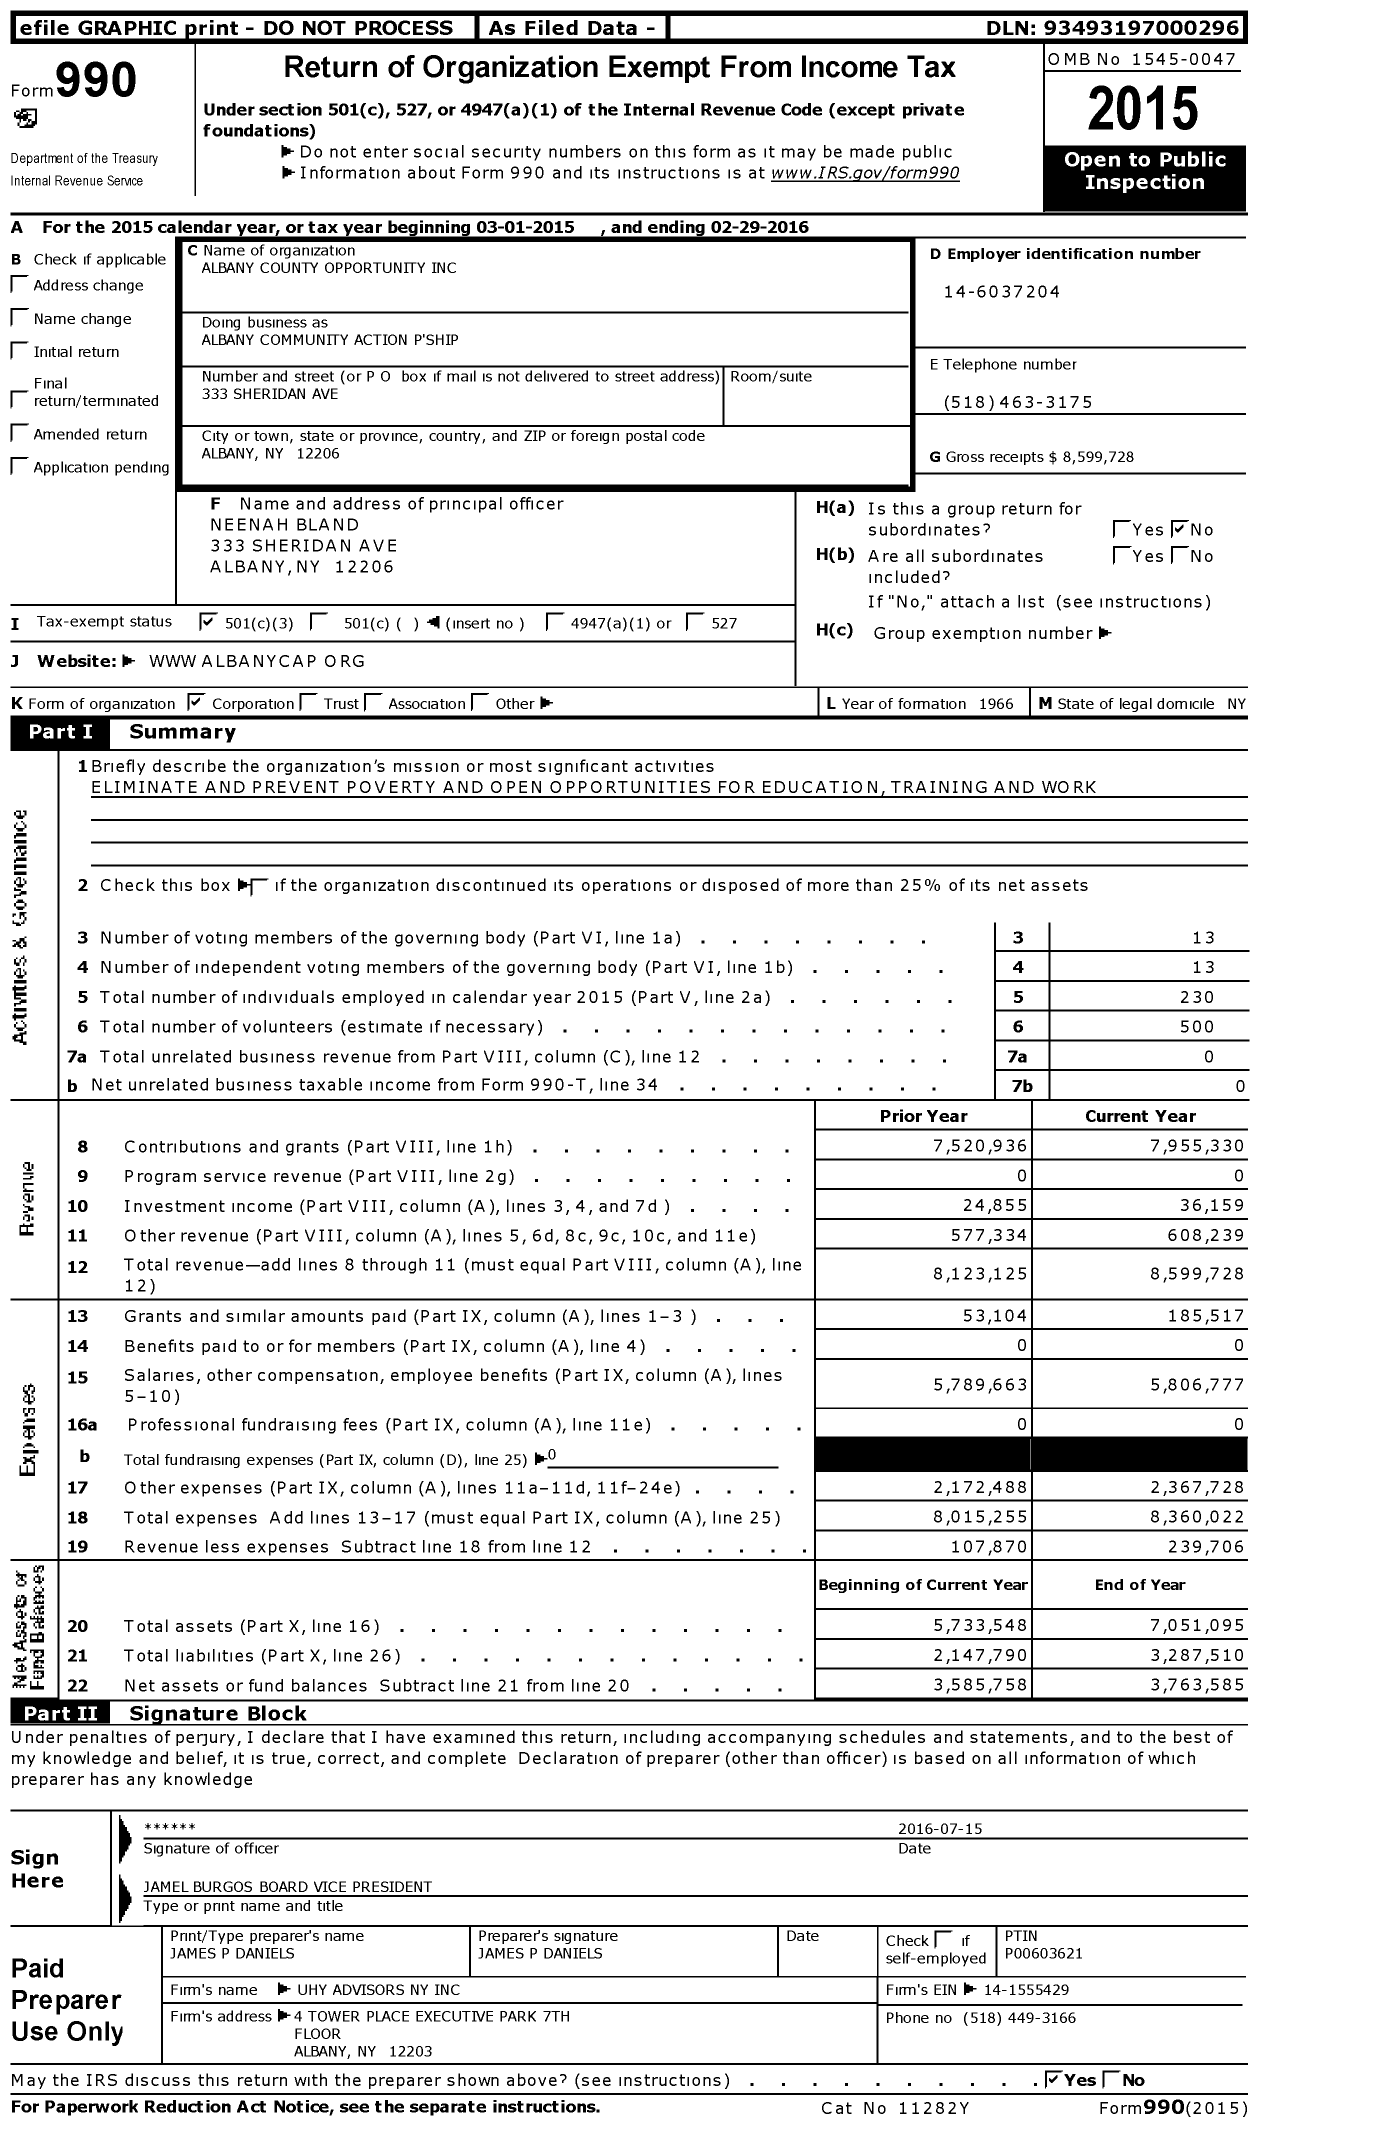 Image of first page of 2015 Form 990 for Albany Community Action P'ship